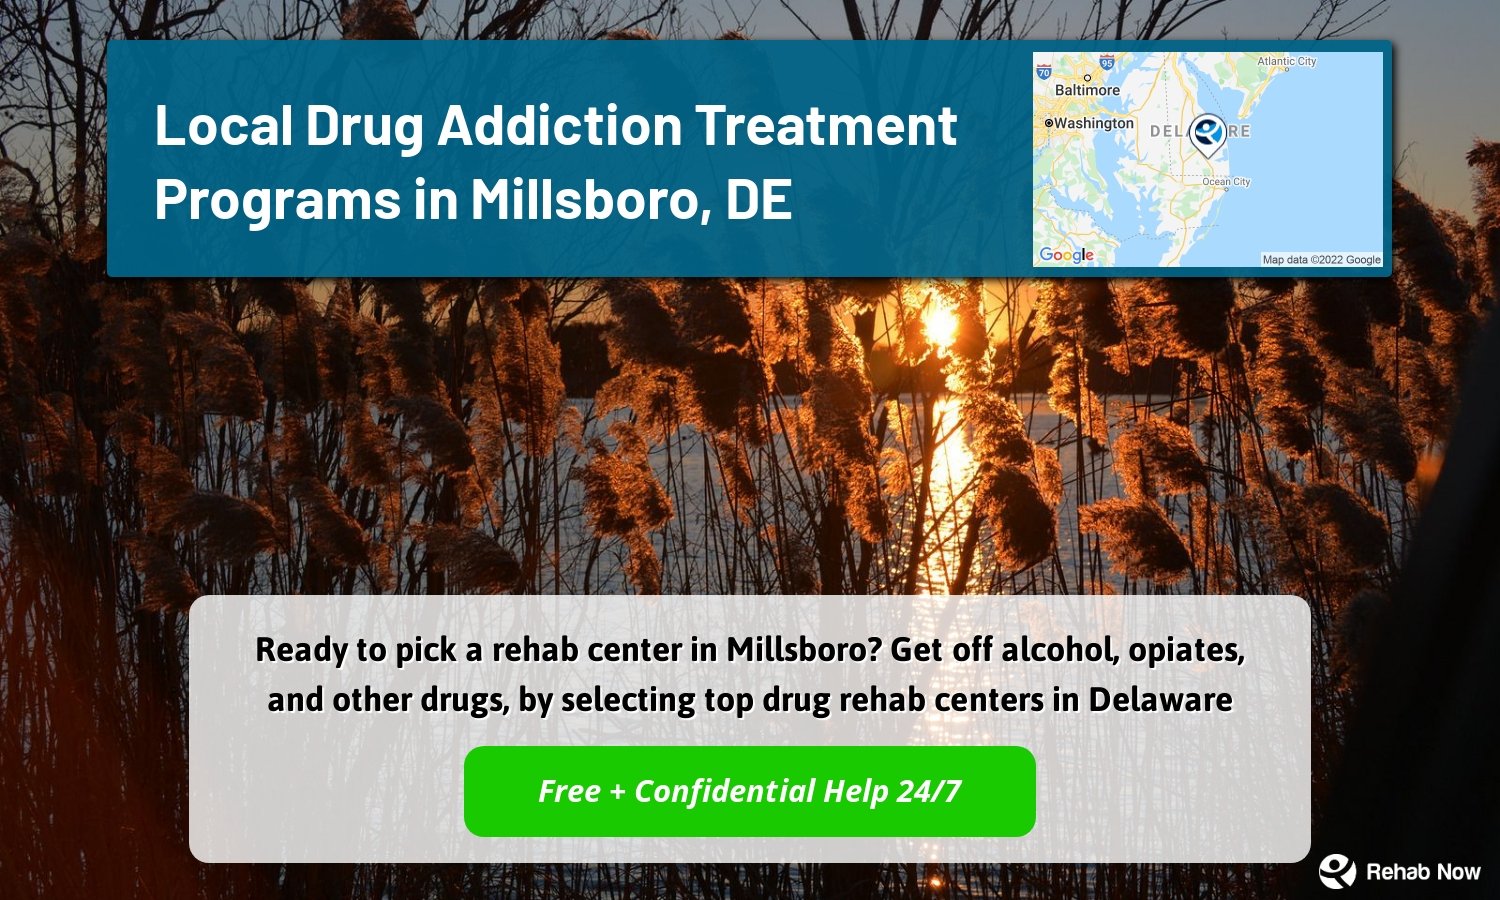 Ready to pick a rehab center in Millsboro? Get off alcohol, opiates, and other drugs, by selecting top drug rehab centers in Delaware